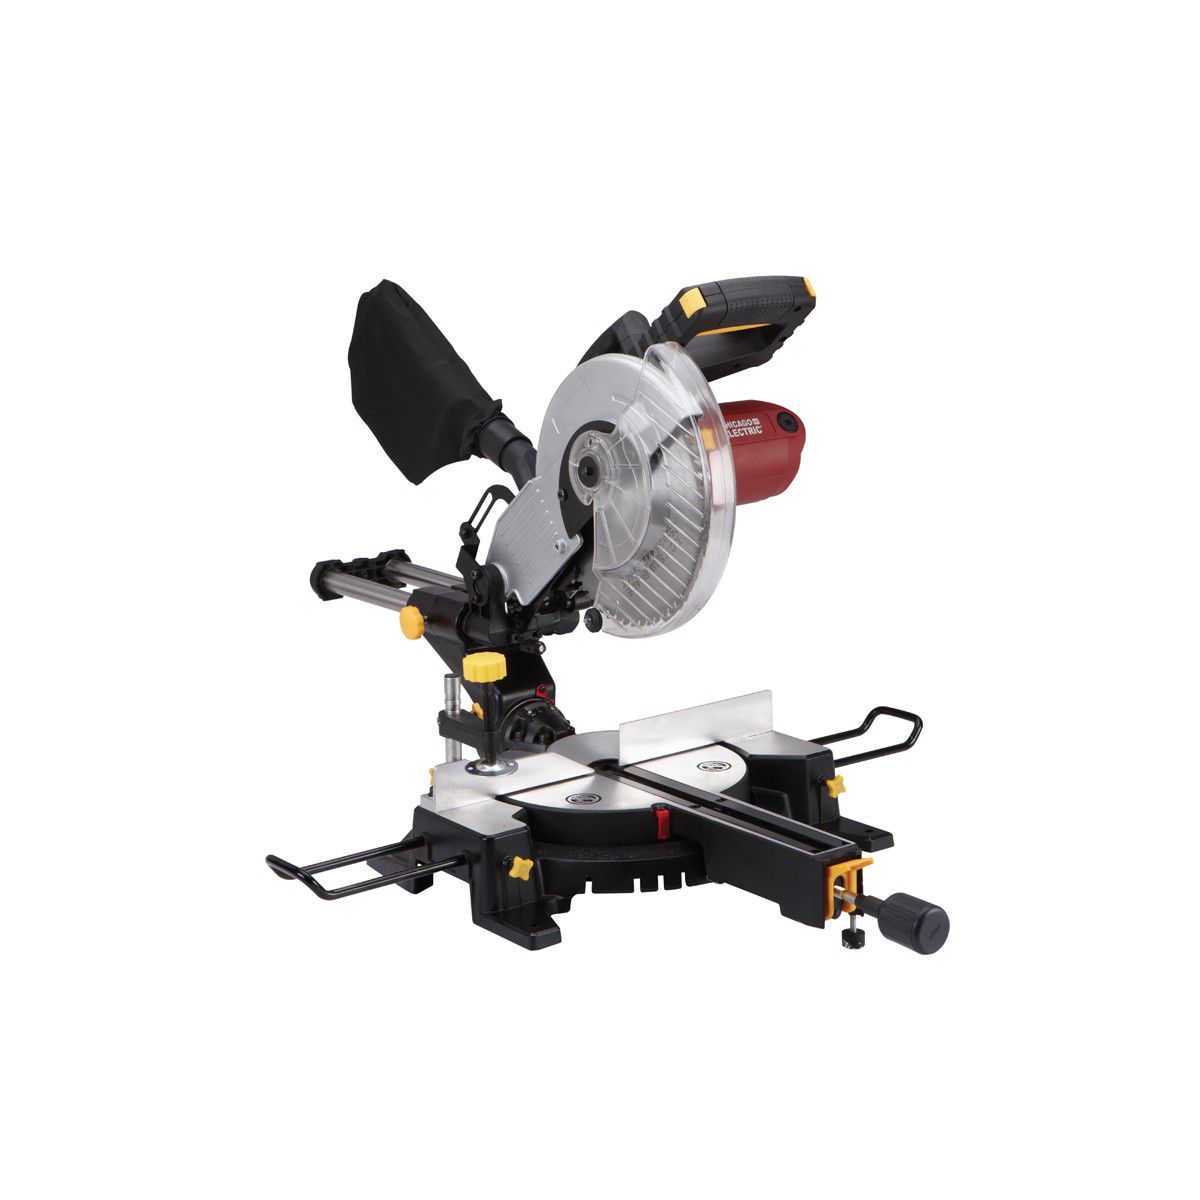 Brand New 10" Compound Sliding Miter Saw, Admiral 10 in. 80T Fine Cut Circular Saw Blade & Oshlun LG-M01 Miter and Portable Saw Laser Guide